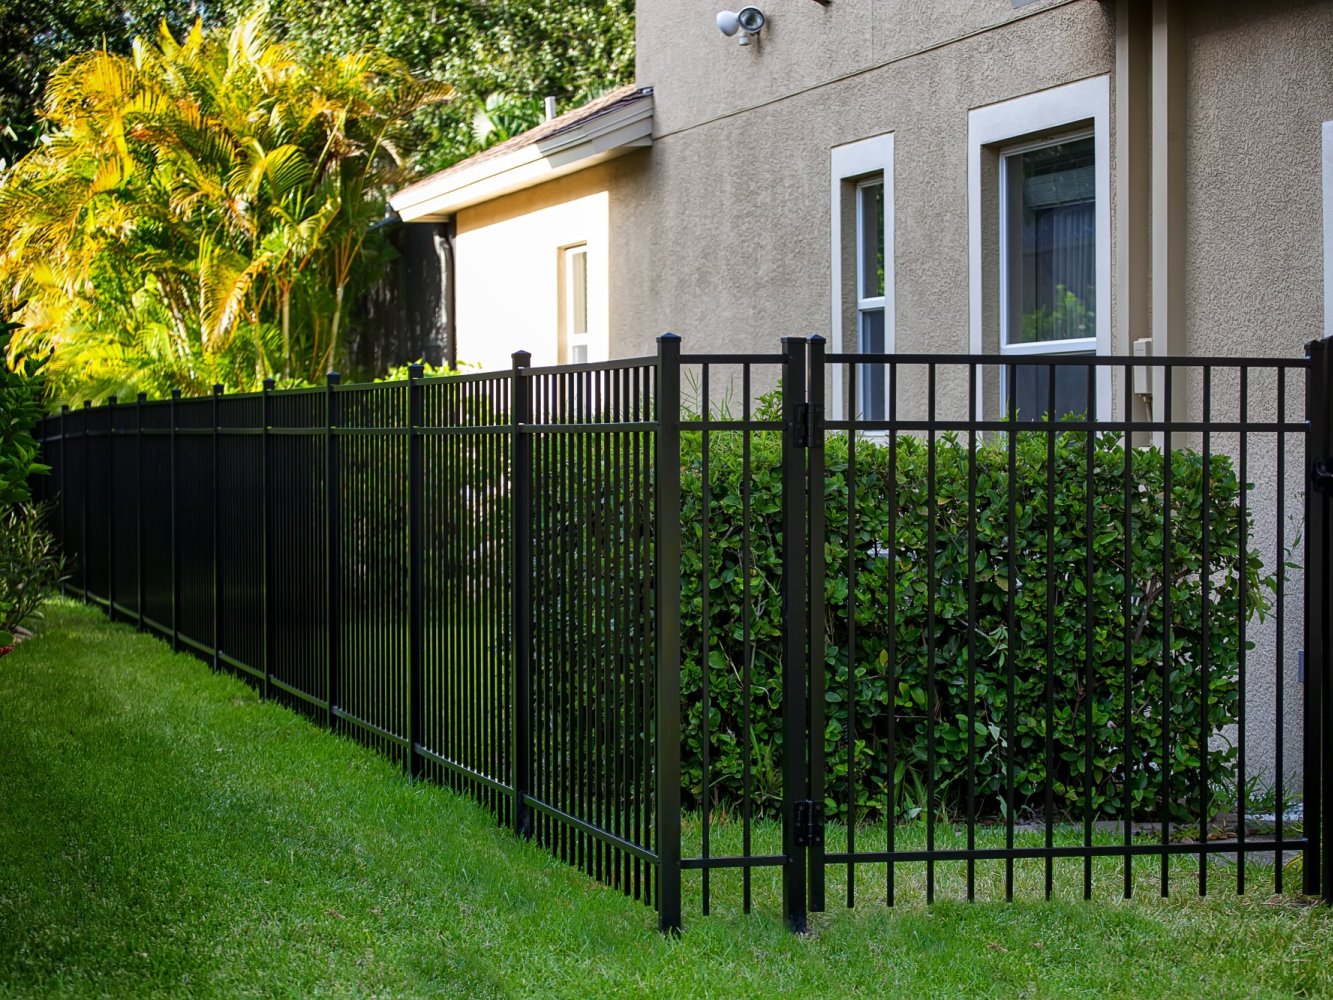 The Lonnie & Co. Fencing Difference in Dallas Texas Fence Installations